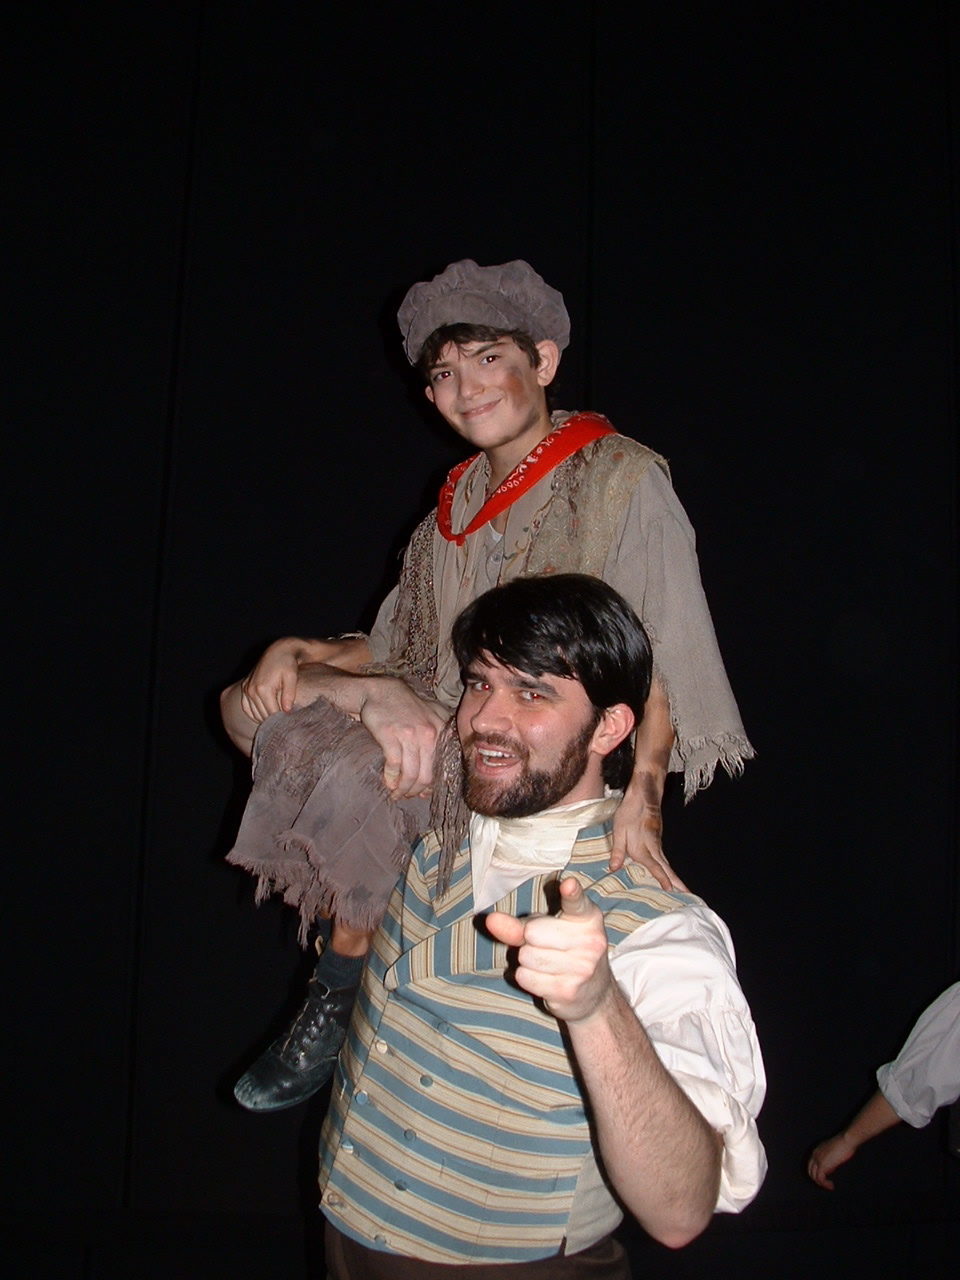 As Gavroche in the Broadway revival of Les Miserables (2007)